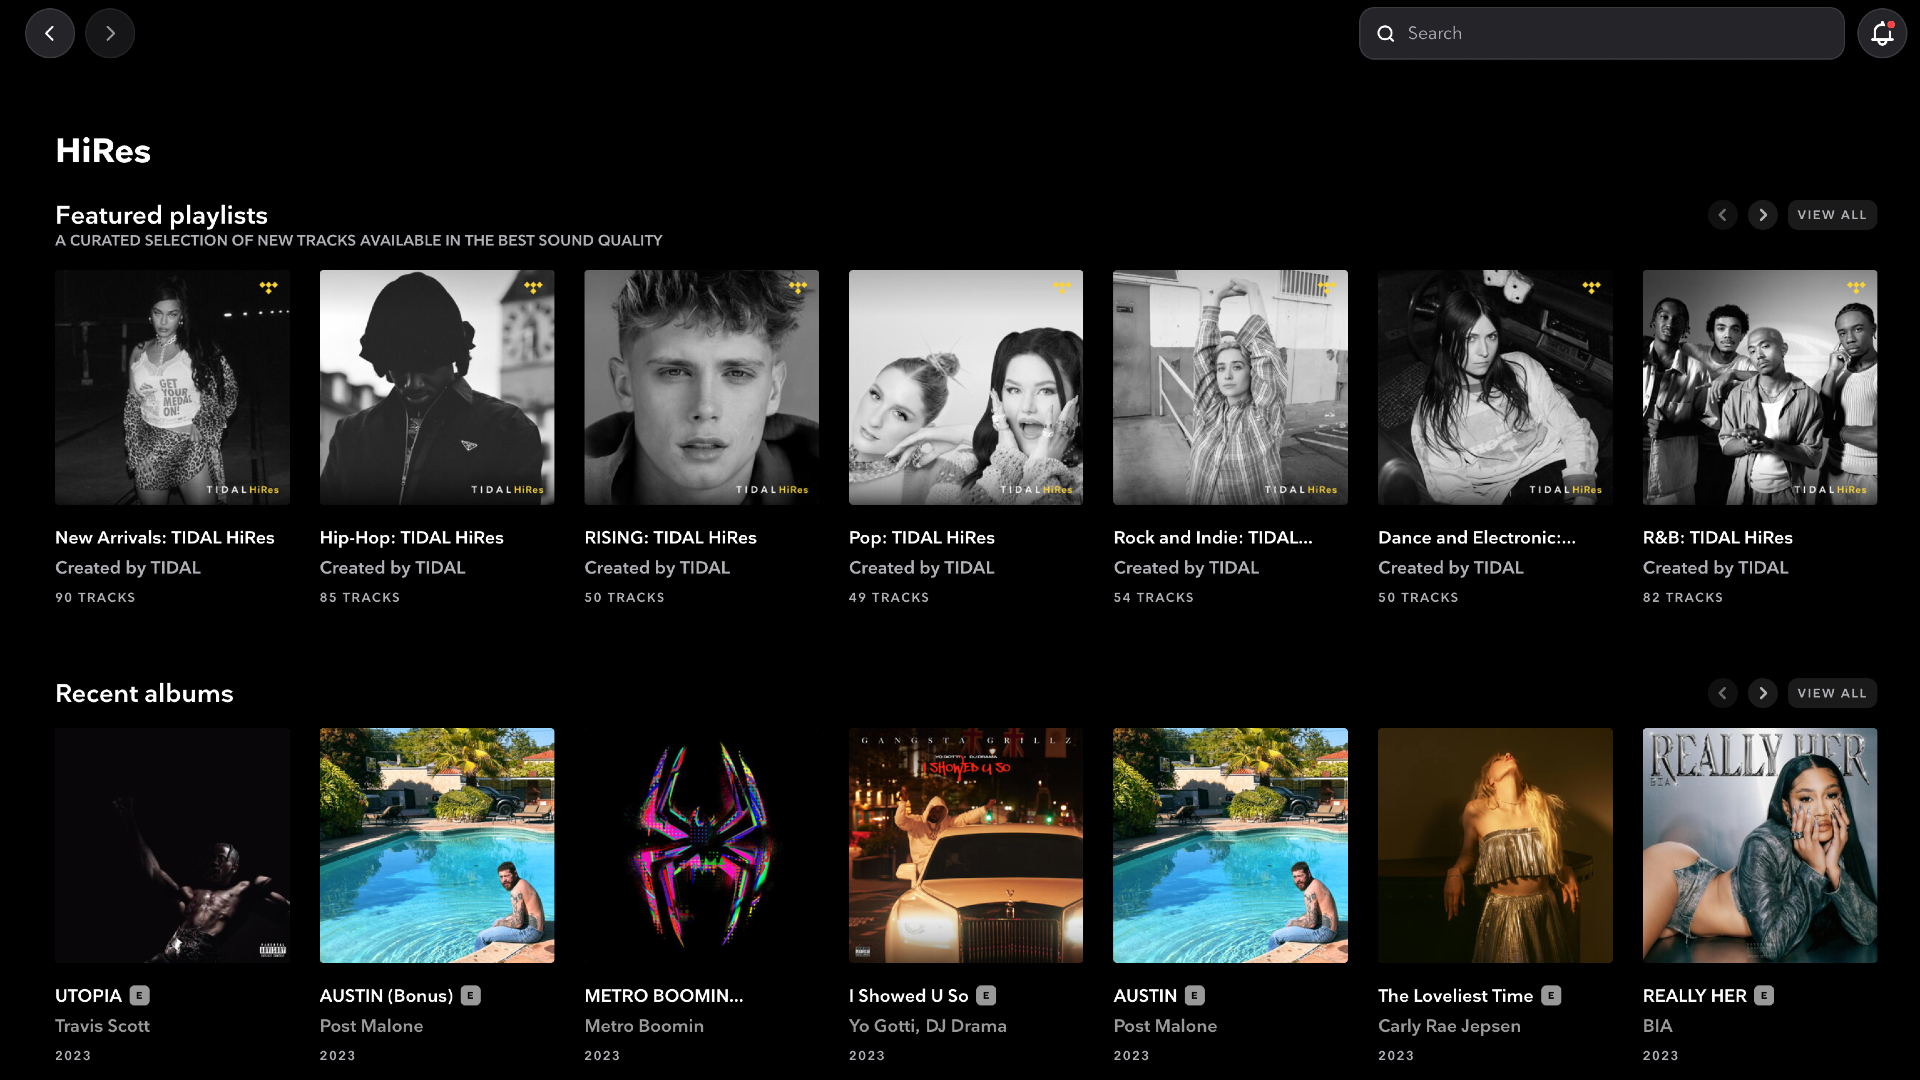 Tidal's new HiRes-branded homepage